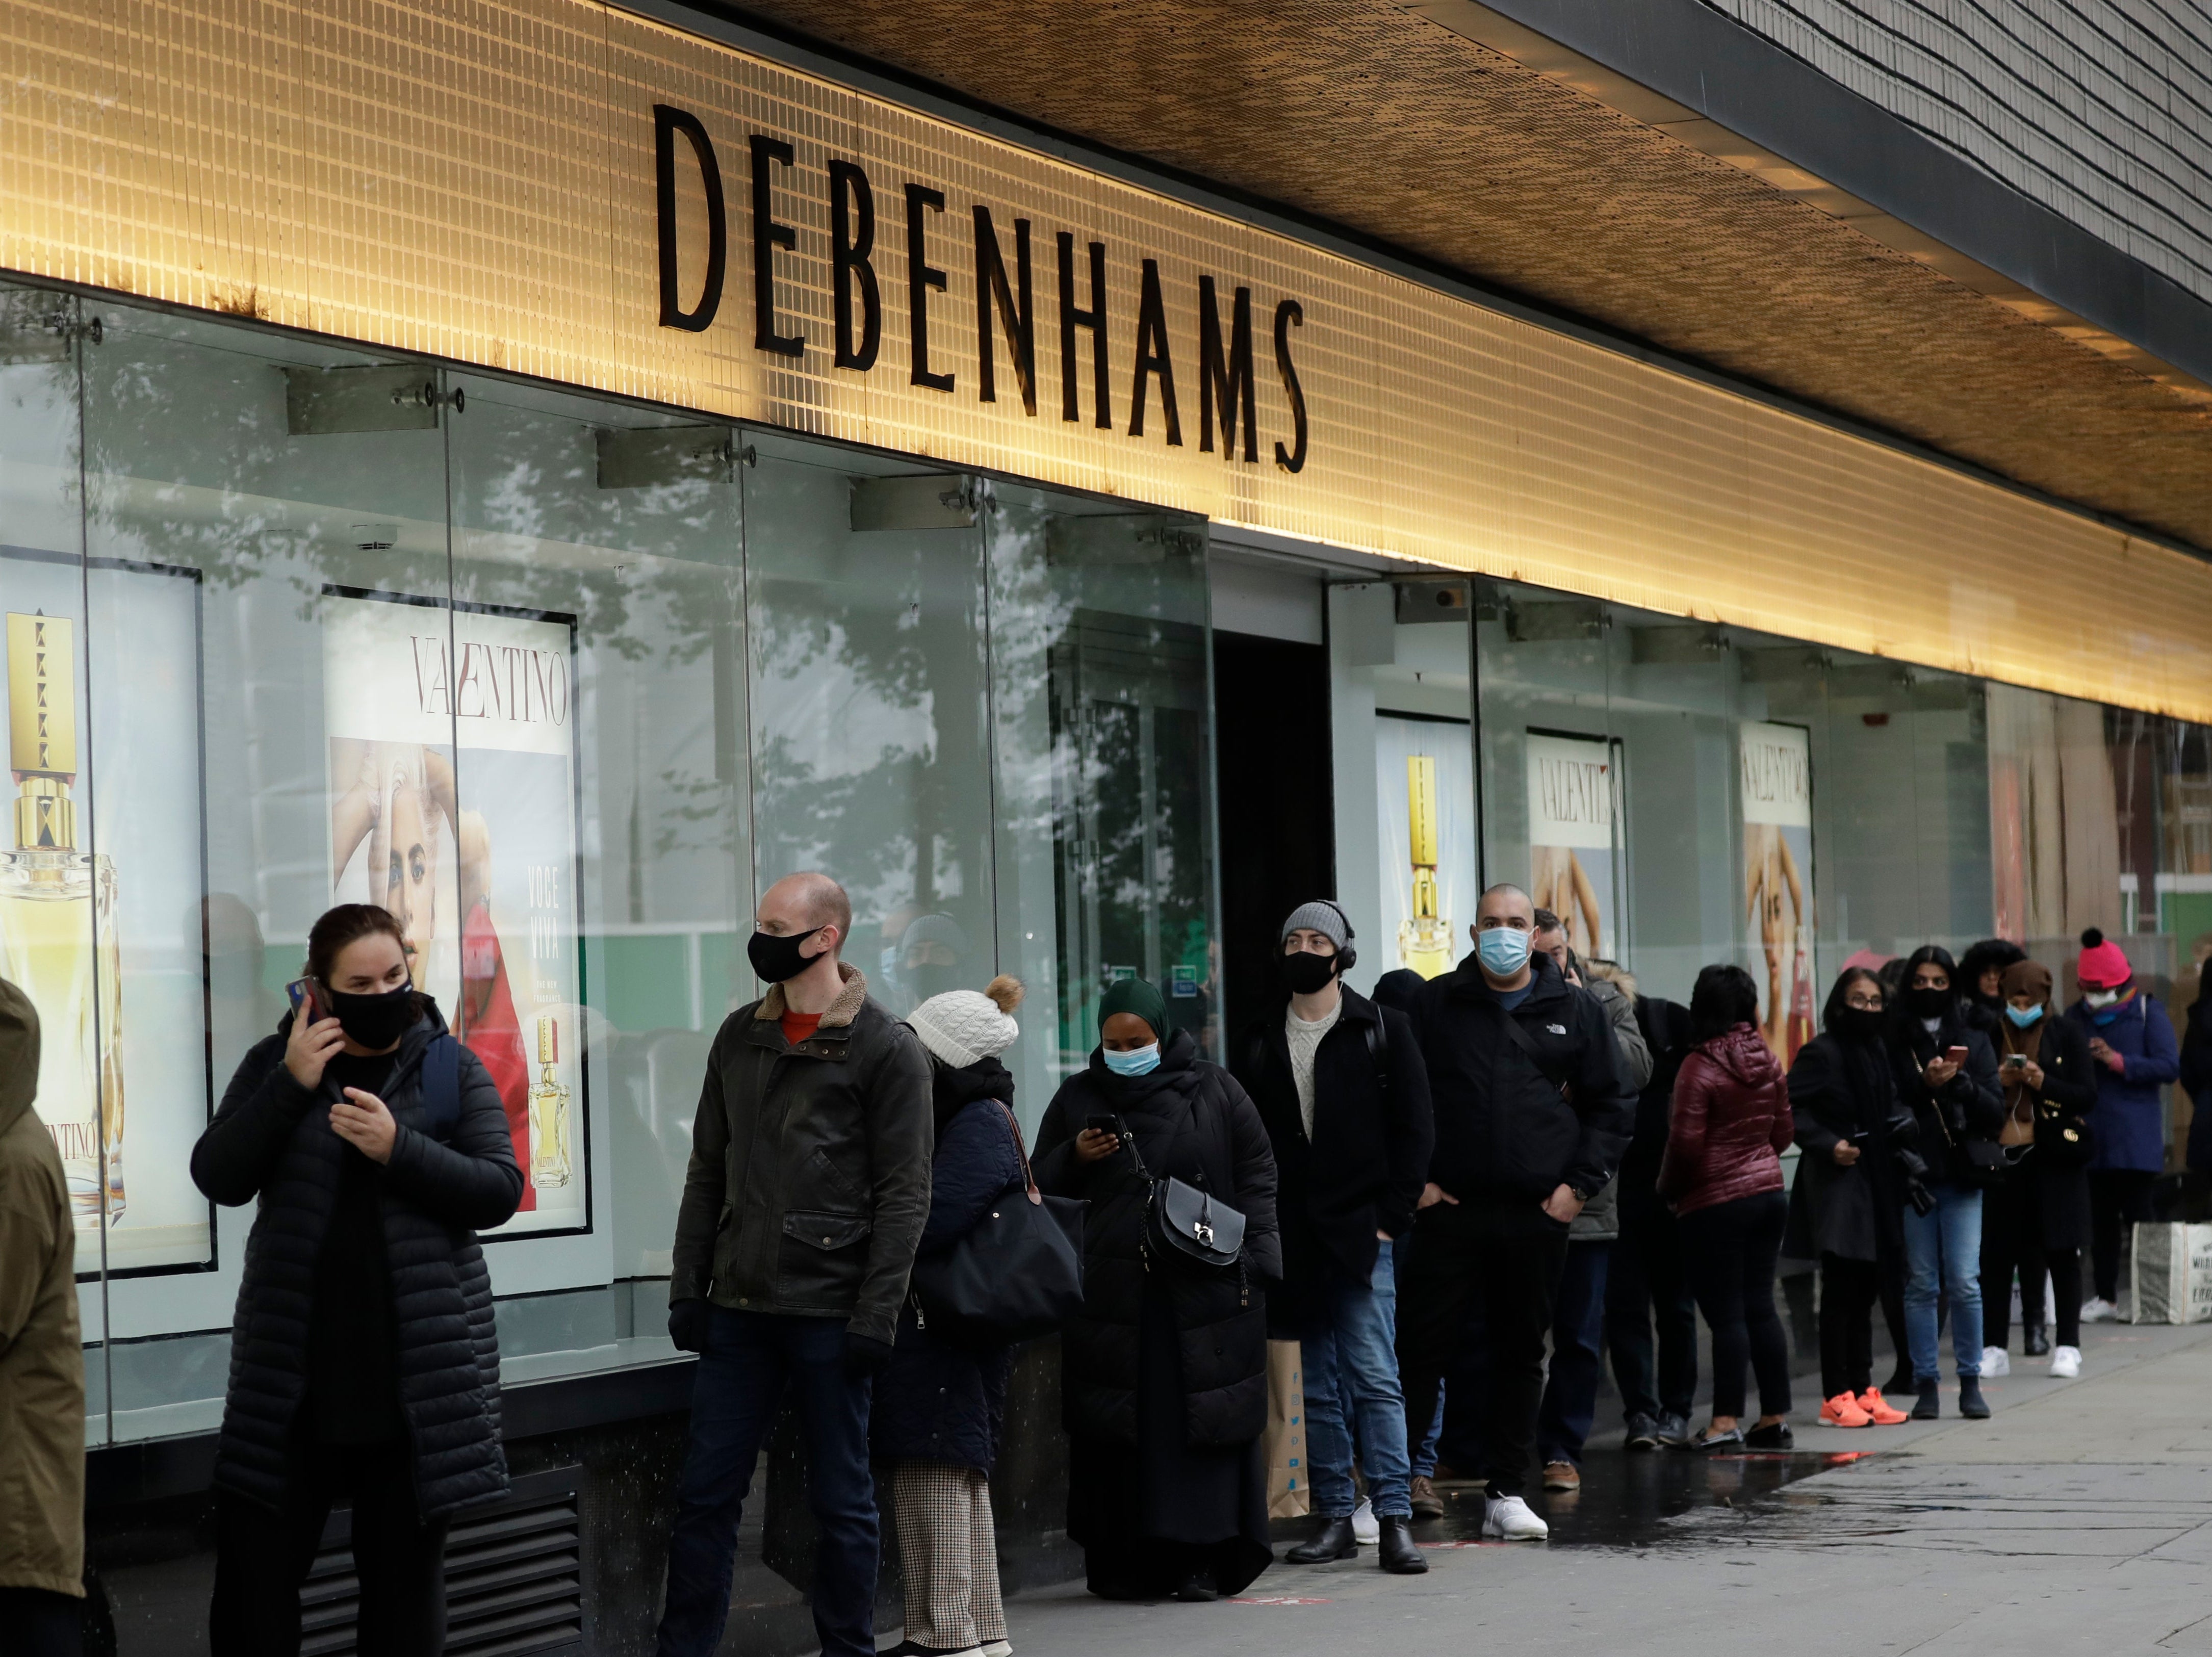 People queue up waiting for Debenhams on Oxford Street to reopen